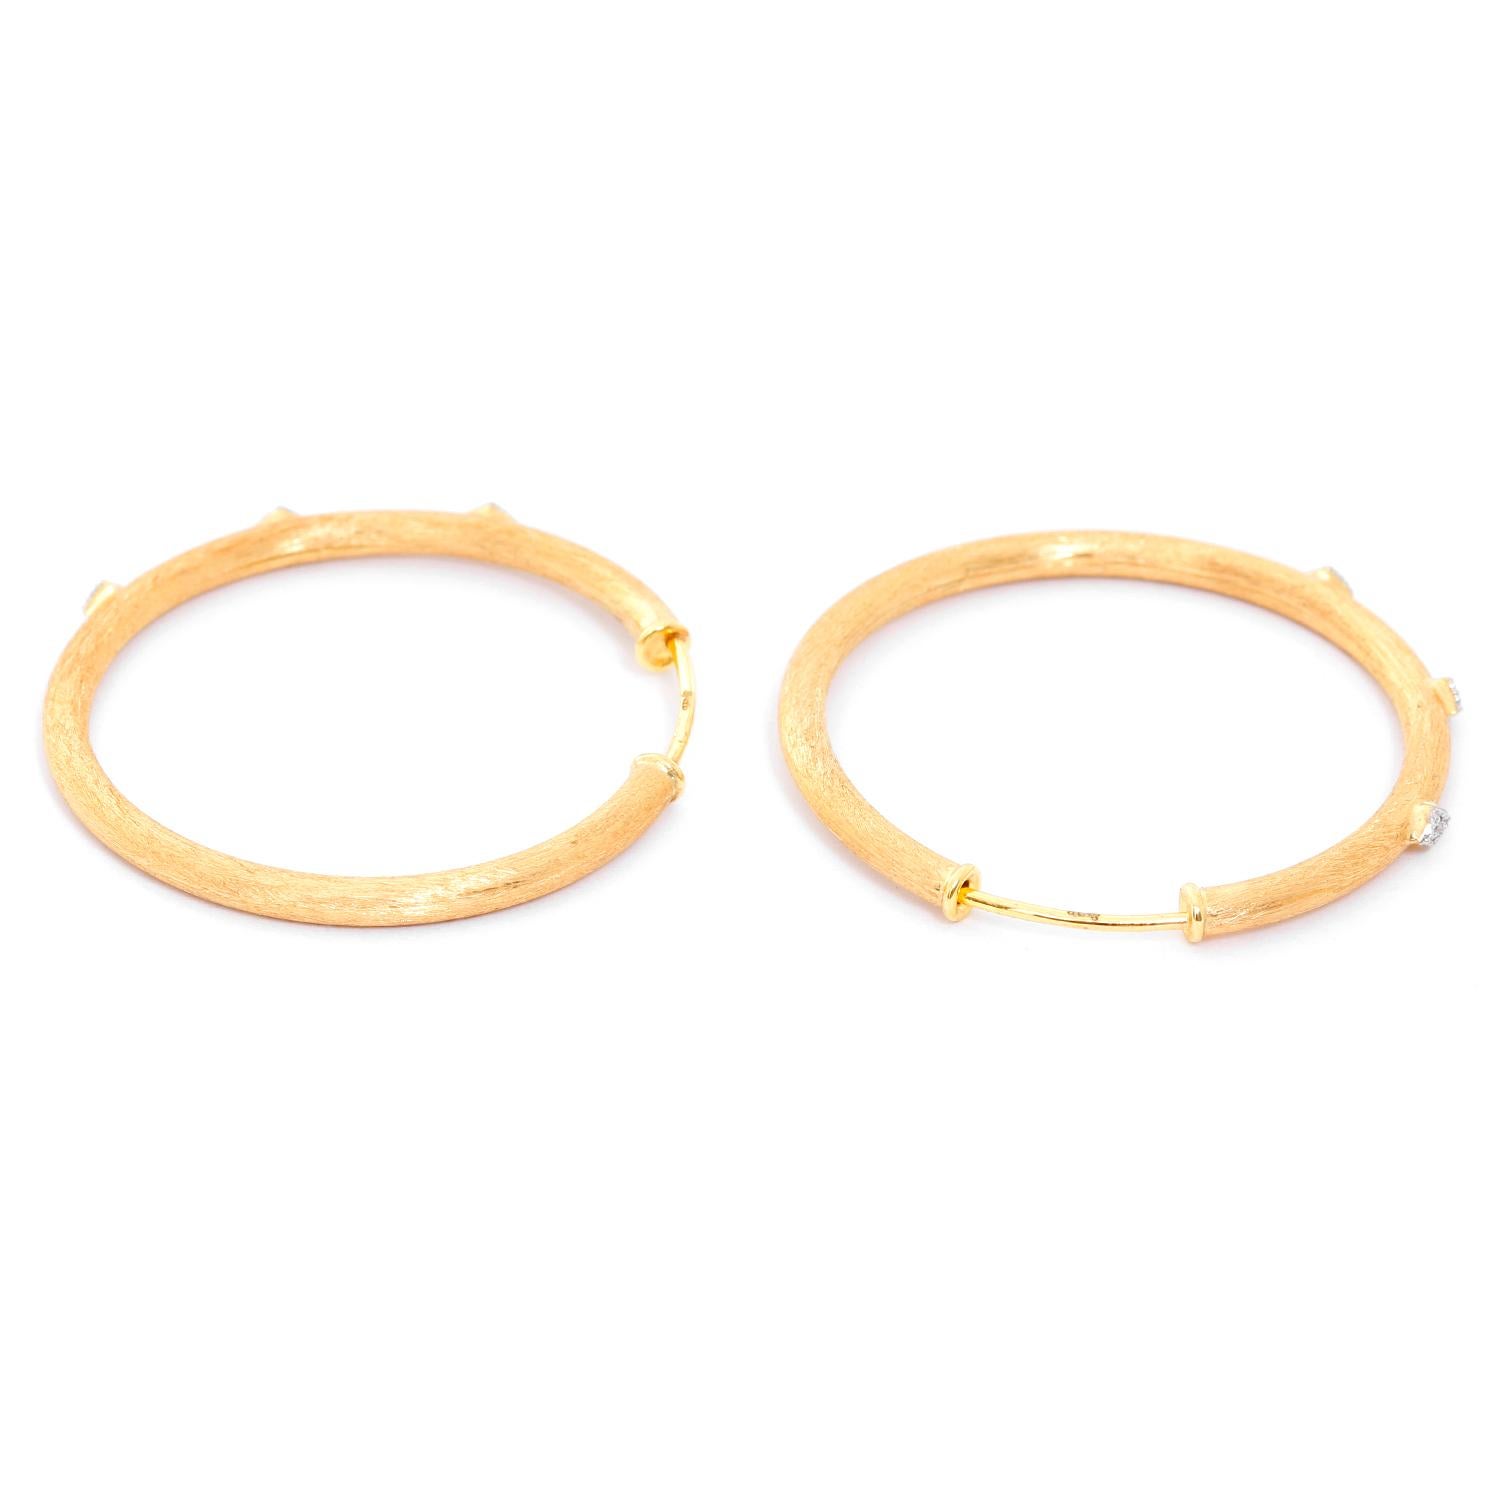 Jude Frances Lisse Kite Hoop Earrings  - From the Lisse Collection, the Lisse Kite Large Flexible Hoop features prong set diamond kites in 18K yellow gold with the signature brushed JFJ finish. Diameter  40 mm.